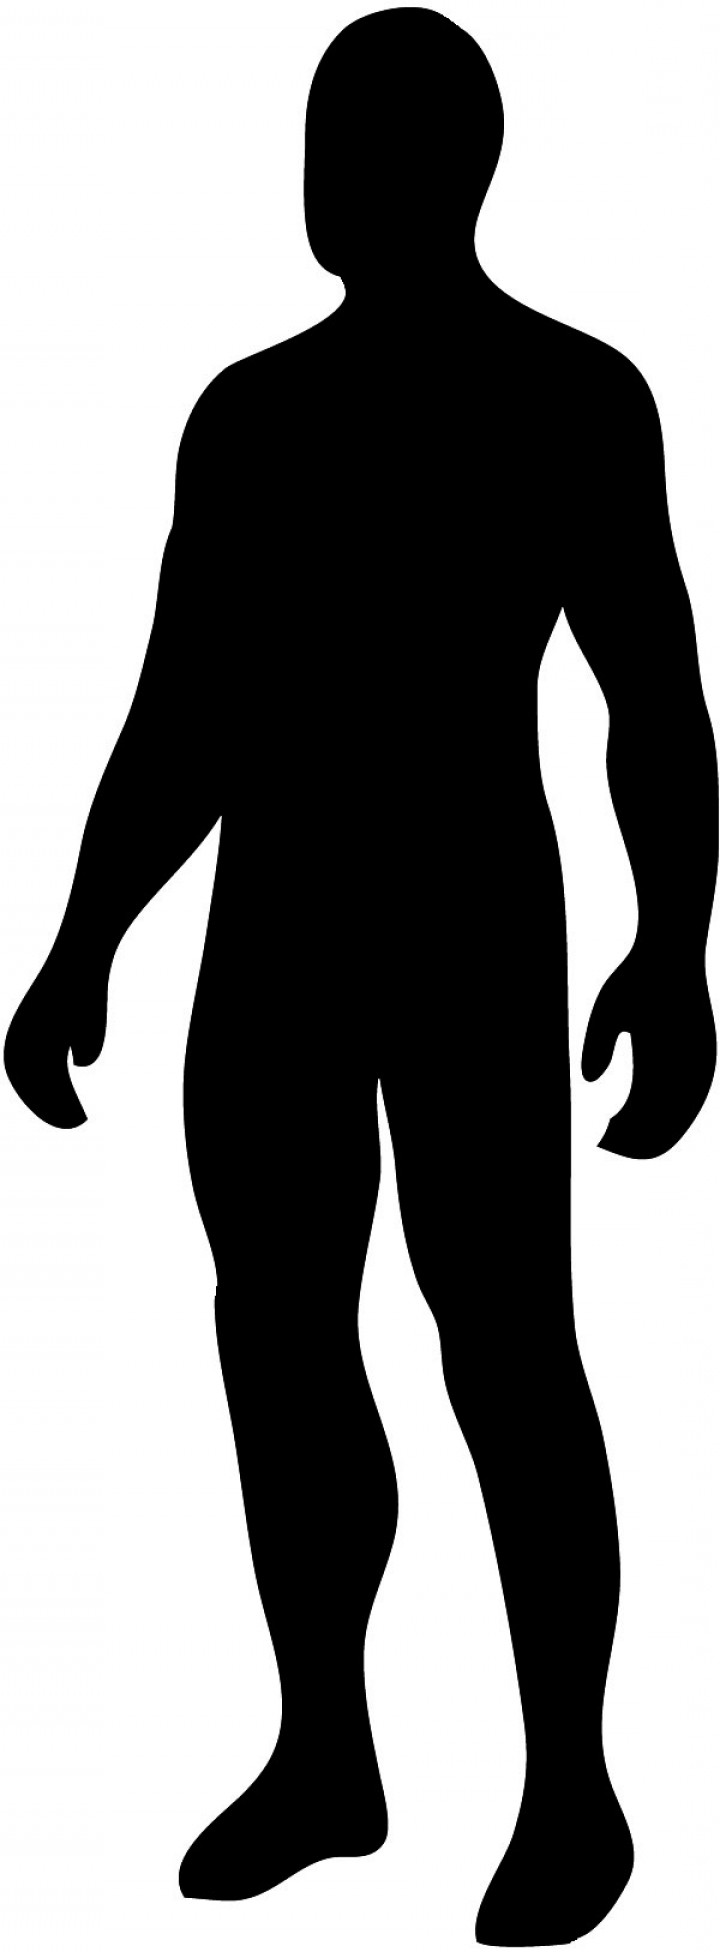 clipart pictures of human body - photo #49